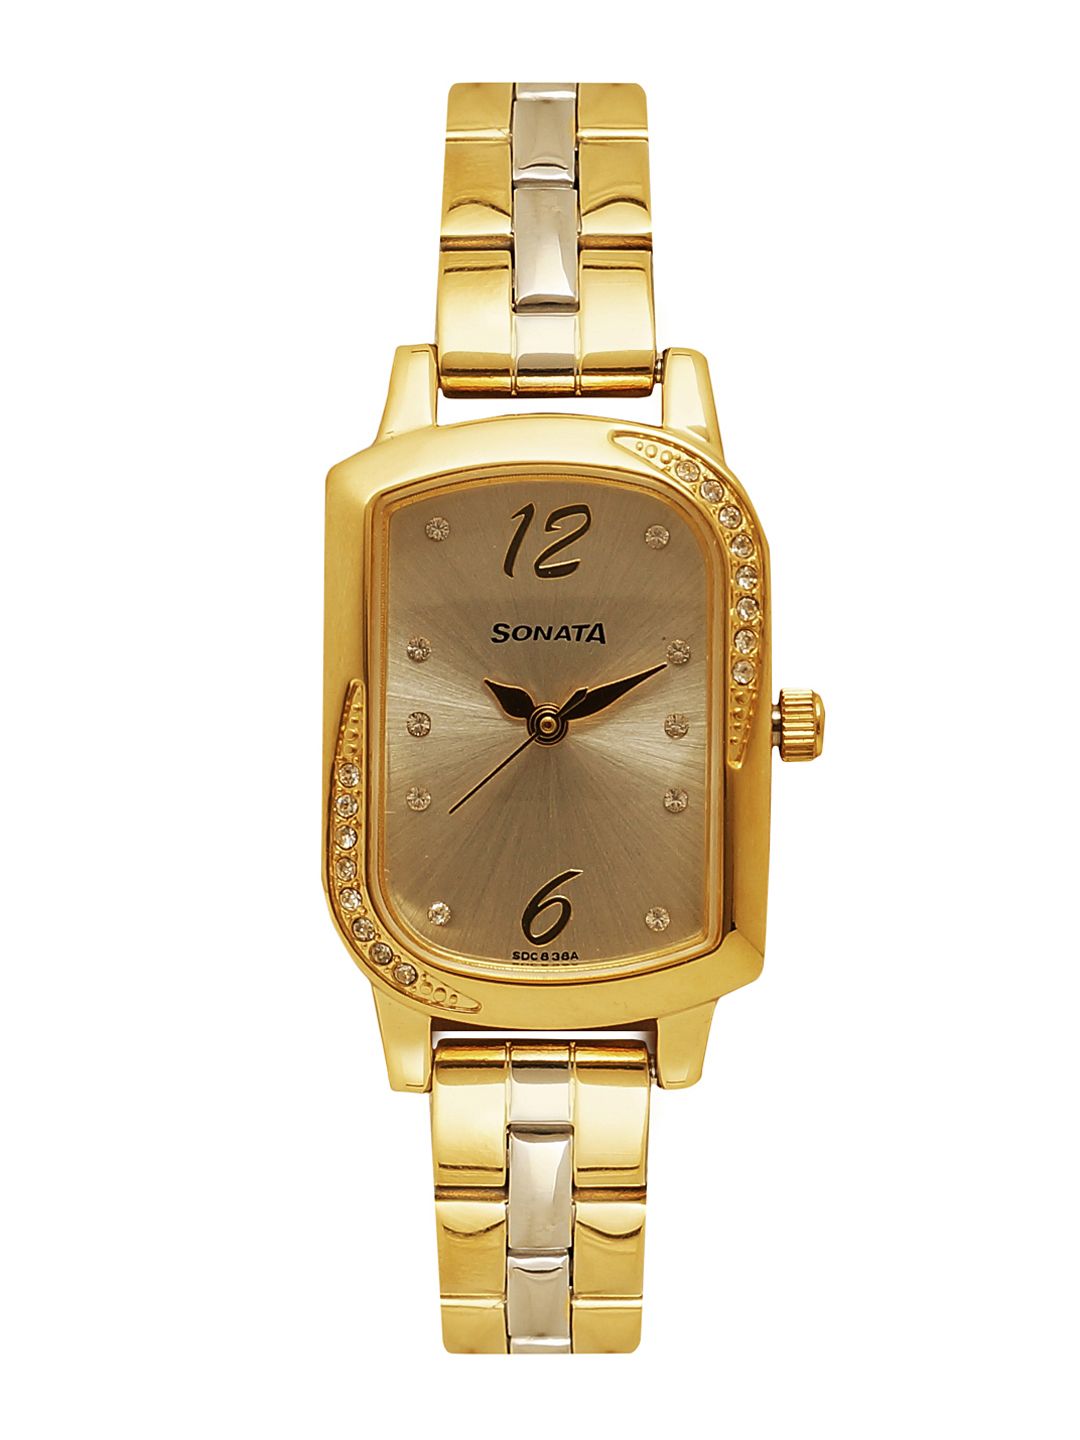 Sonata Women Gold-Toned Analogue Watch NK87001BM01 Price in India